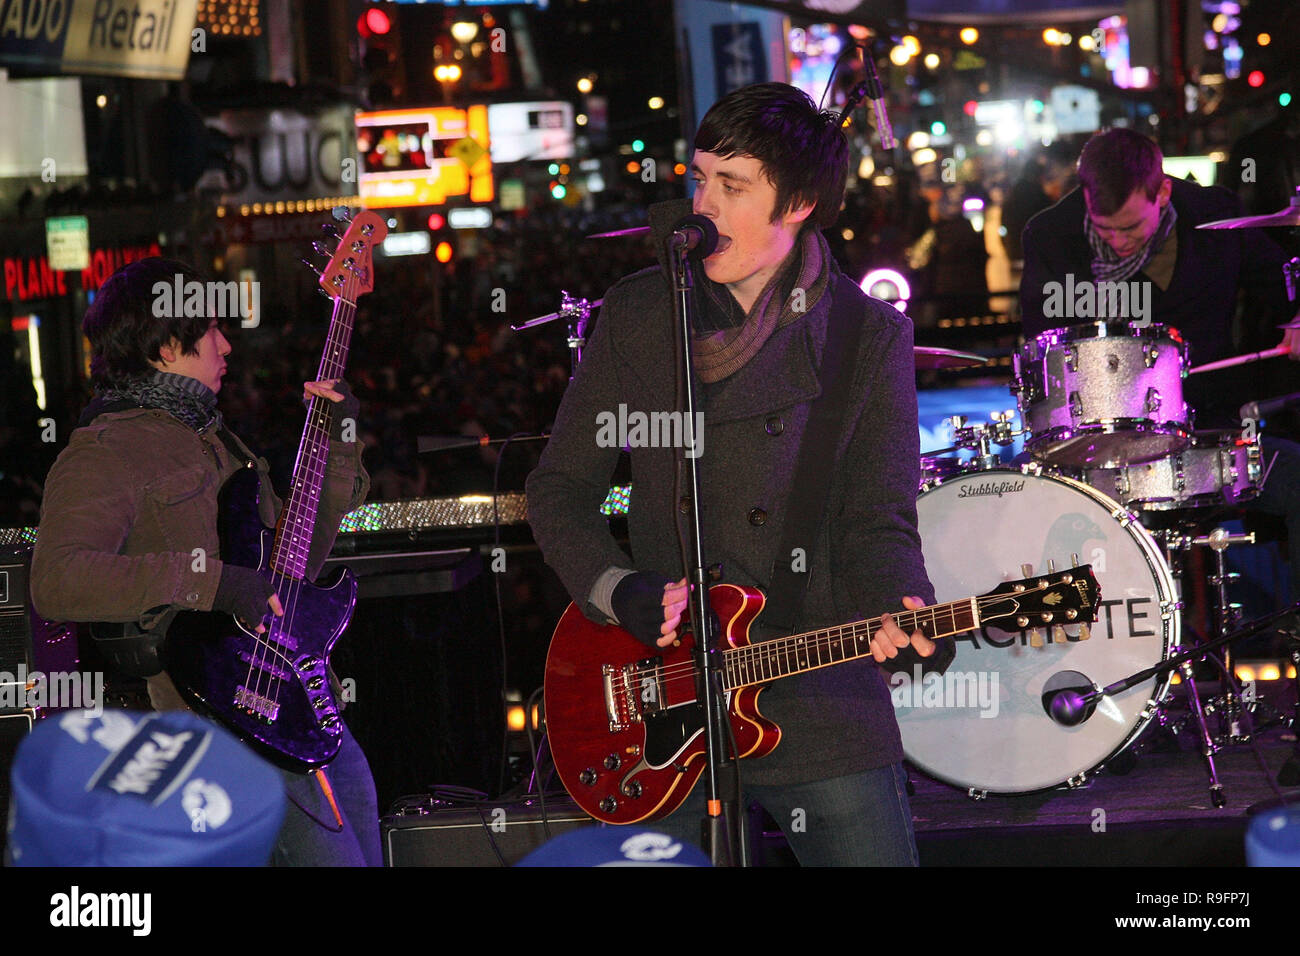 NEW YORK - DECEMBER 31:  Parachute performs on stage at the ceremony to lower the New Years Eve ball in Times Square on December 31, 2008 in New York City. (Photo by Steve Mack/S.D. Mack Pictures) Stock Photo